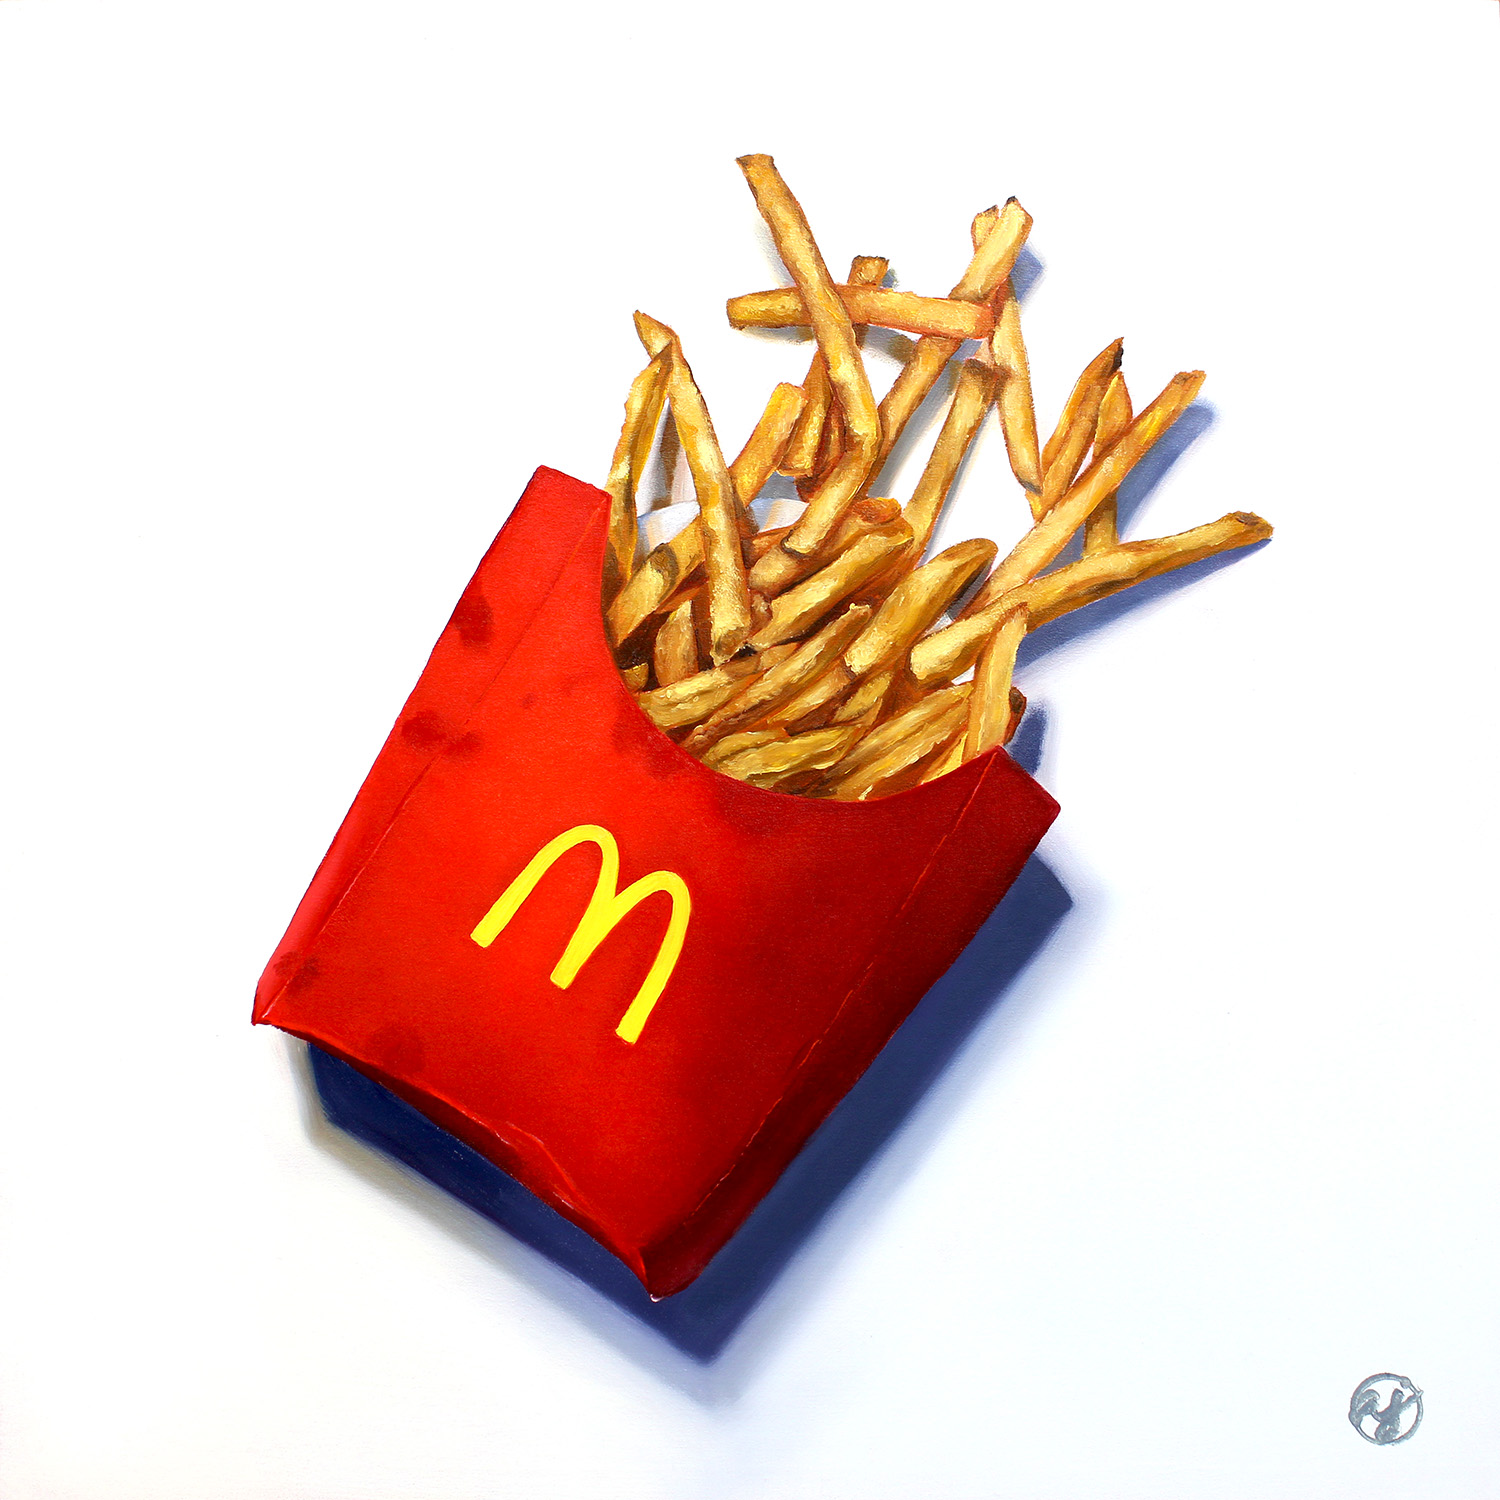 "McDonald's French Fries" 16x16 Original Oil Painting by Abra Johnson